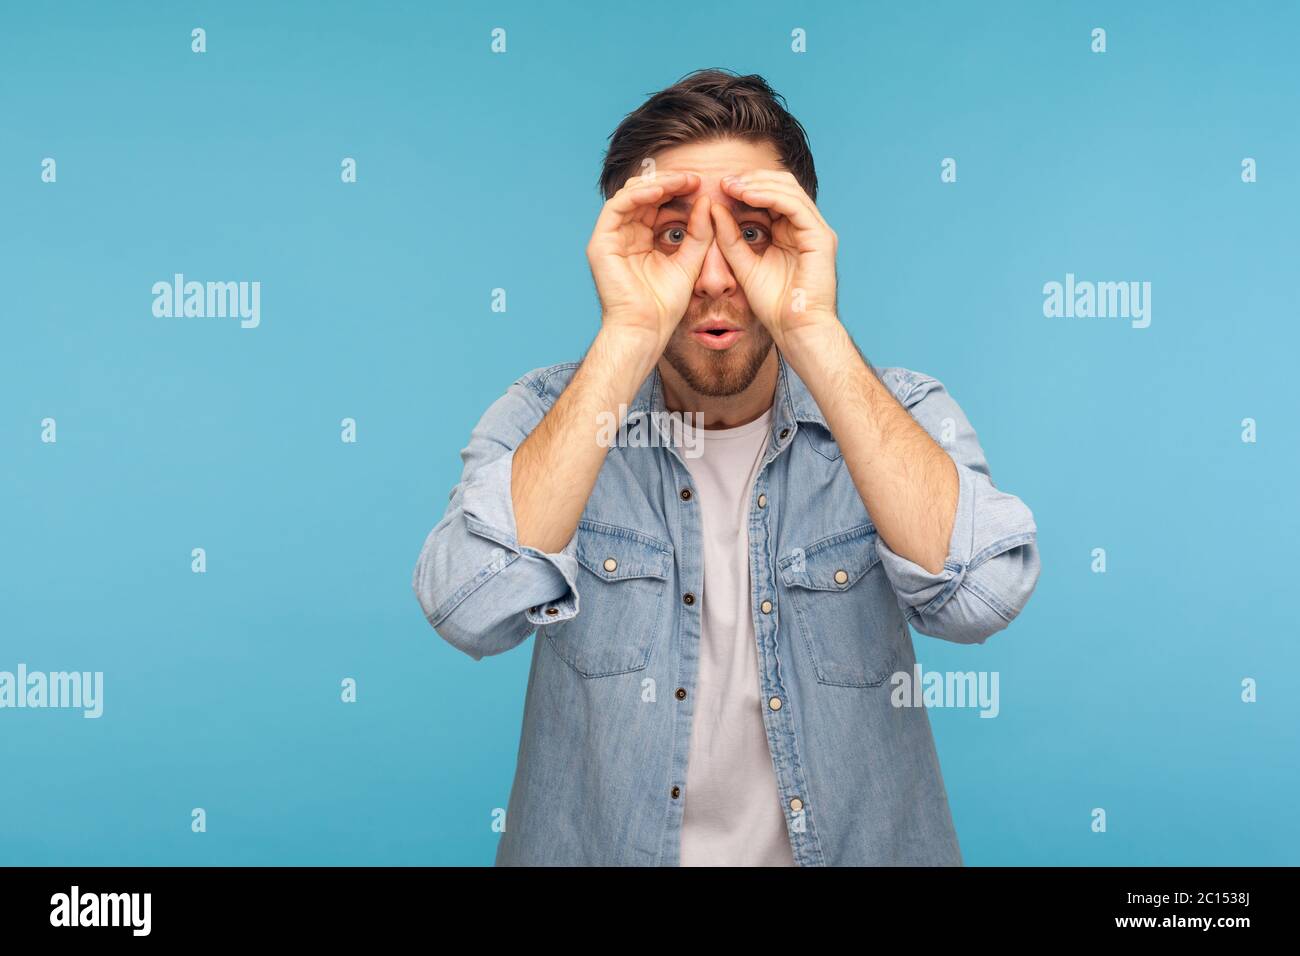 Wow, unbelievable discovery! Portrait of man in worker denim shirt looking far away through binoculars gesture, spying with shocked amazed expression. Stock Photo